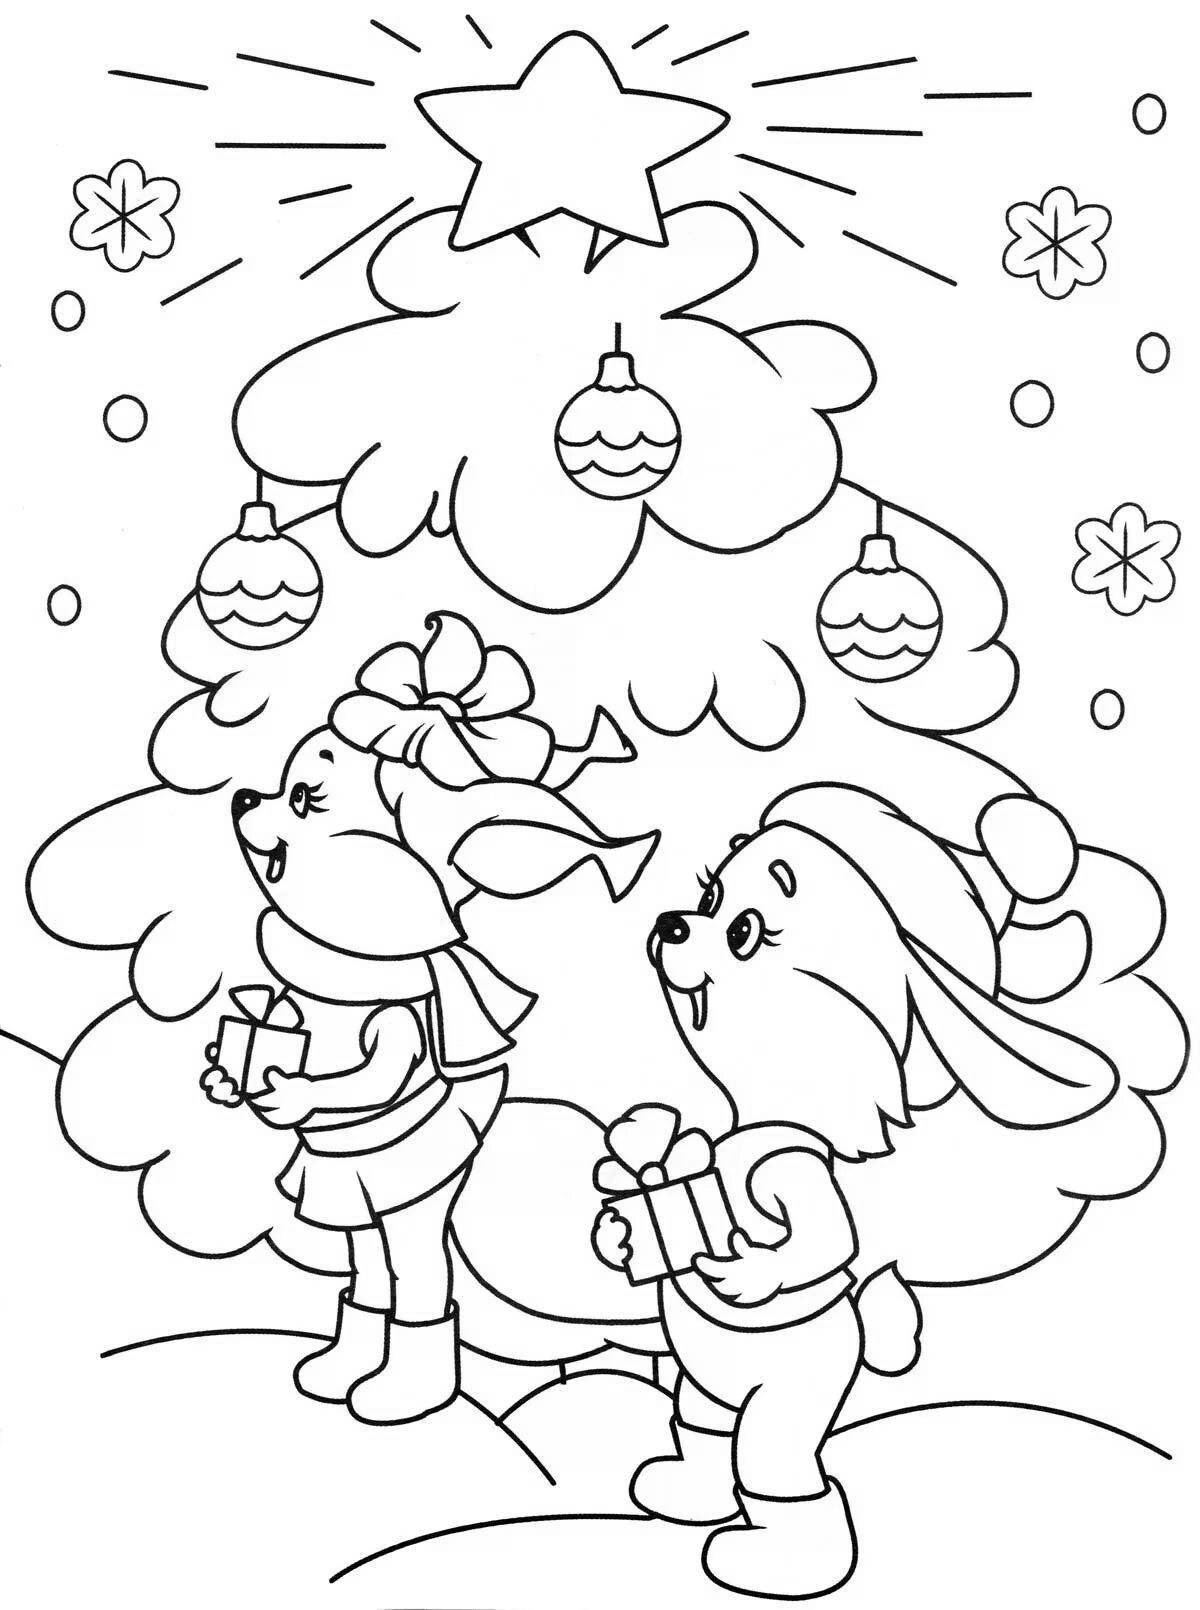 Coloring book exotic hare and tree